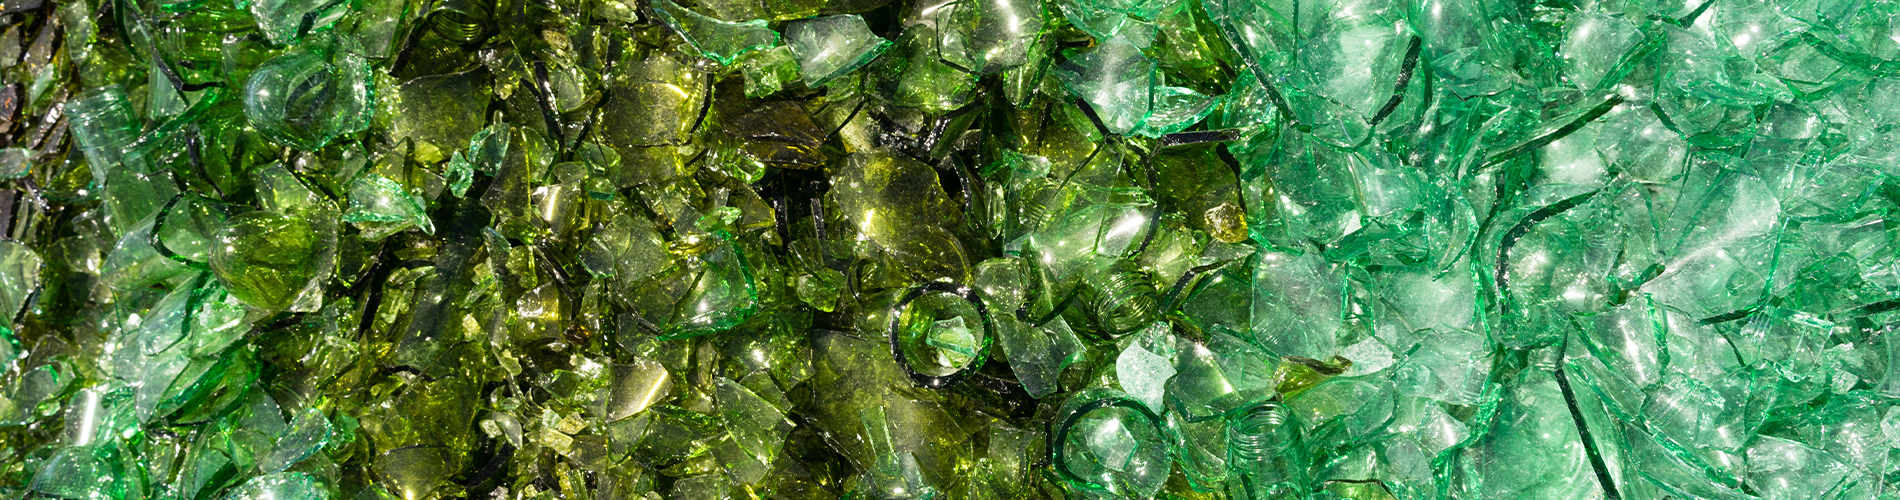 Crushed Glass Abstract - Waste 1900x500